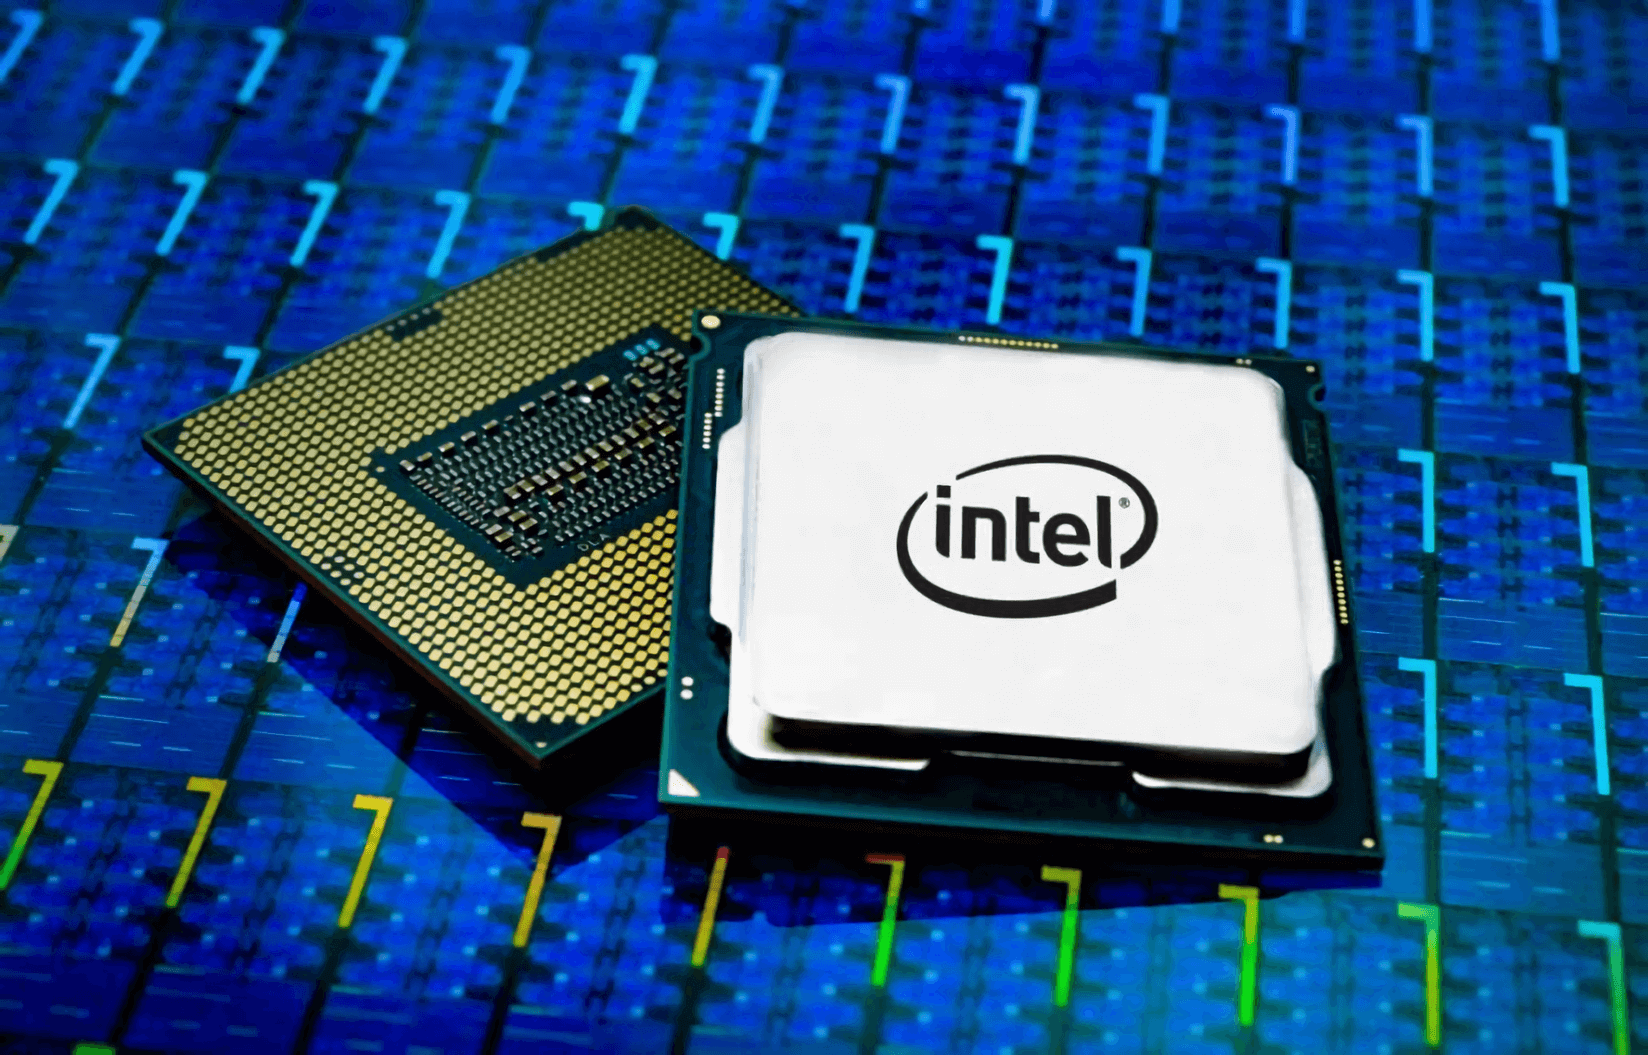 New Downfall vulnerability can steal passwords and encryption keys, discovered in Intel CPUs from 2015 to 2019